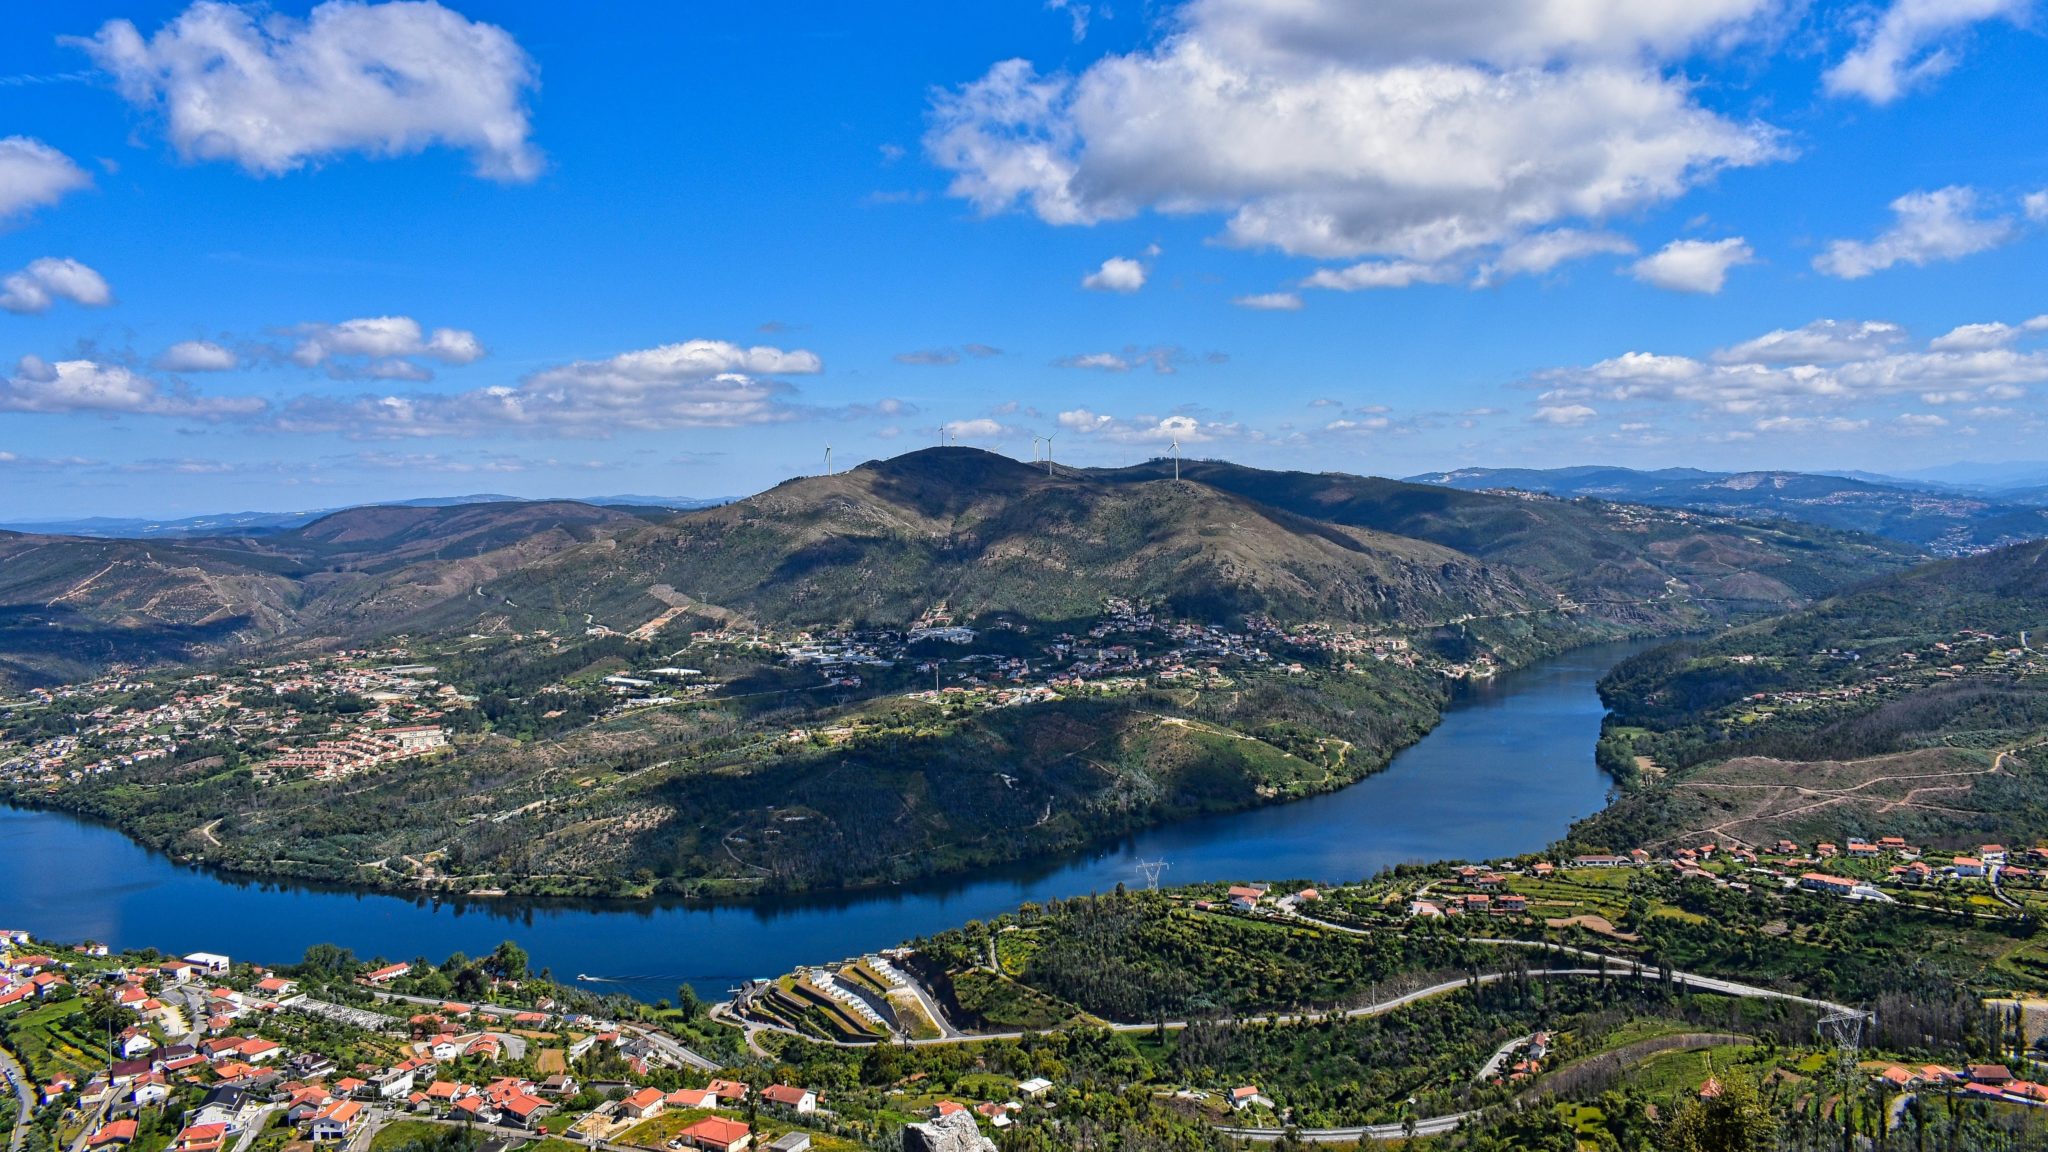 Scientists uncover new information on the Douro river ecosystem